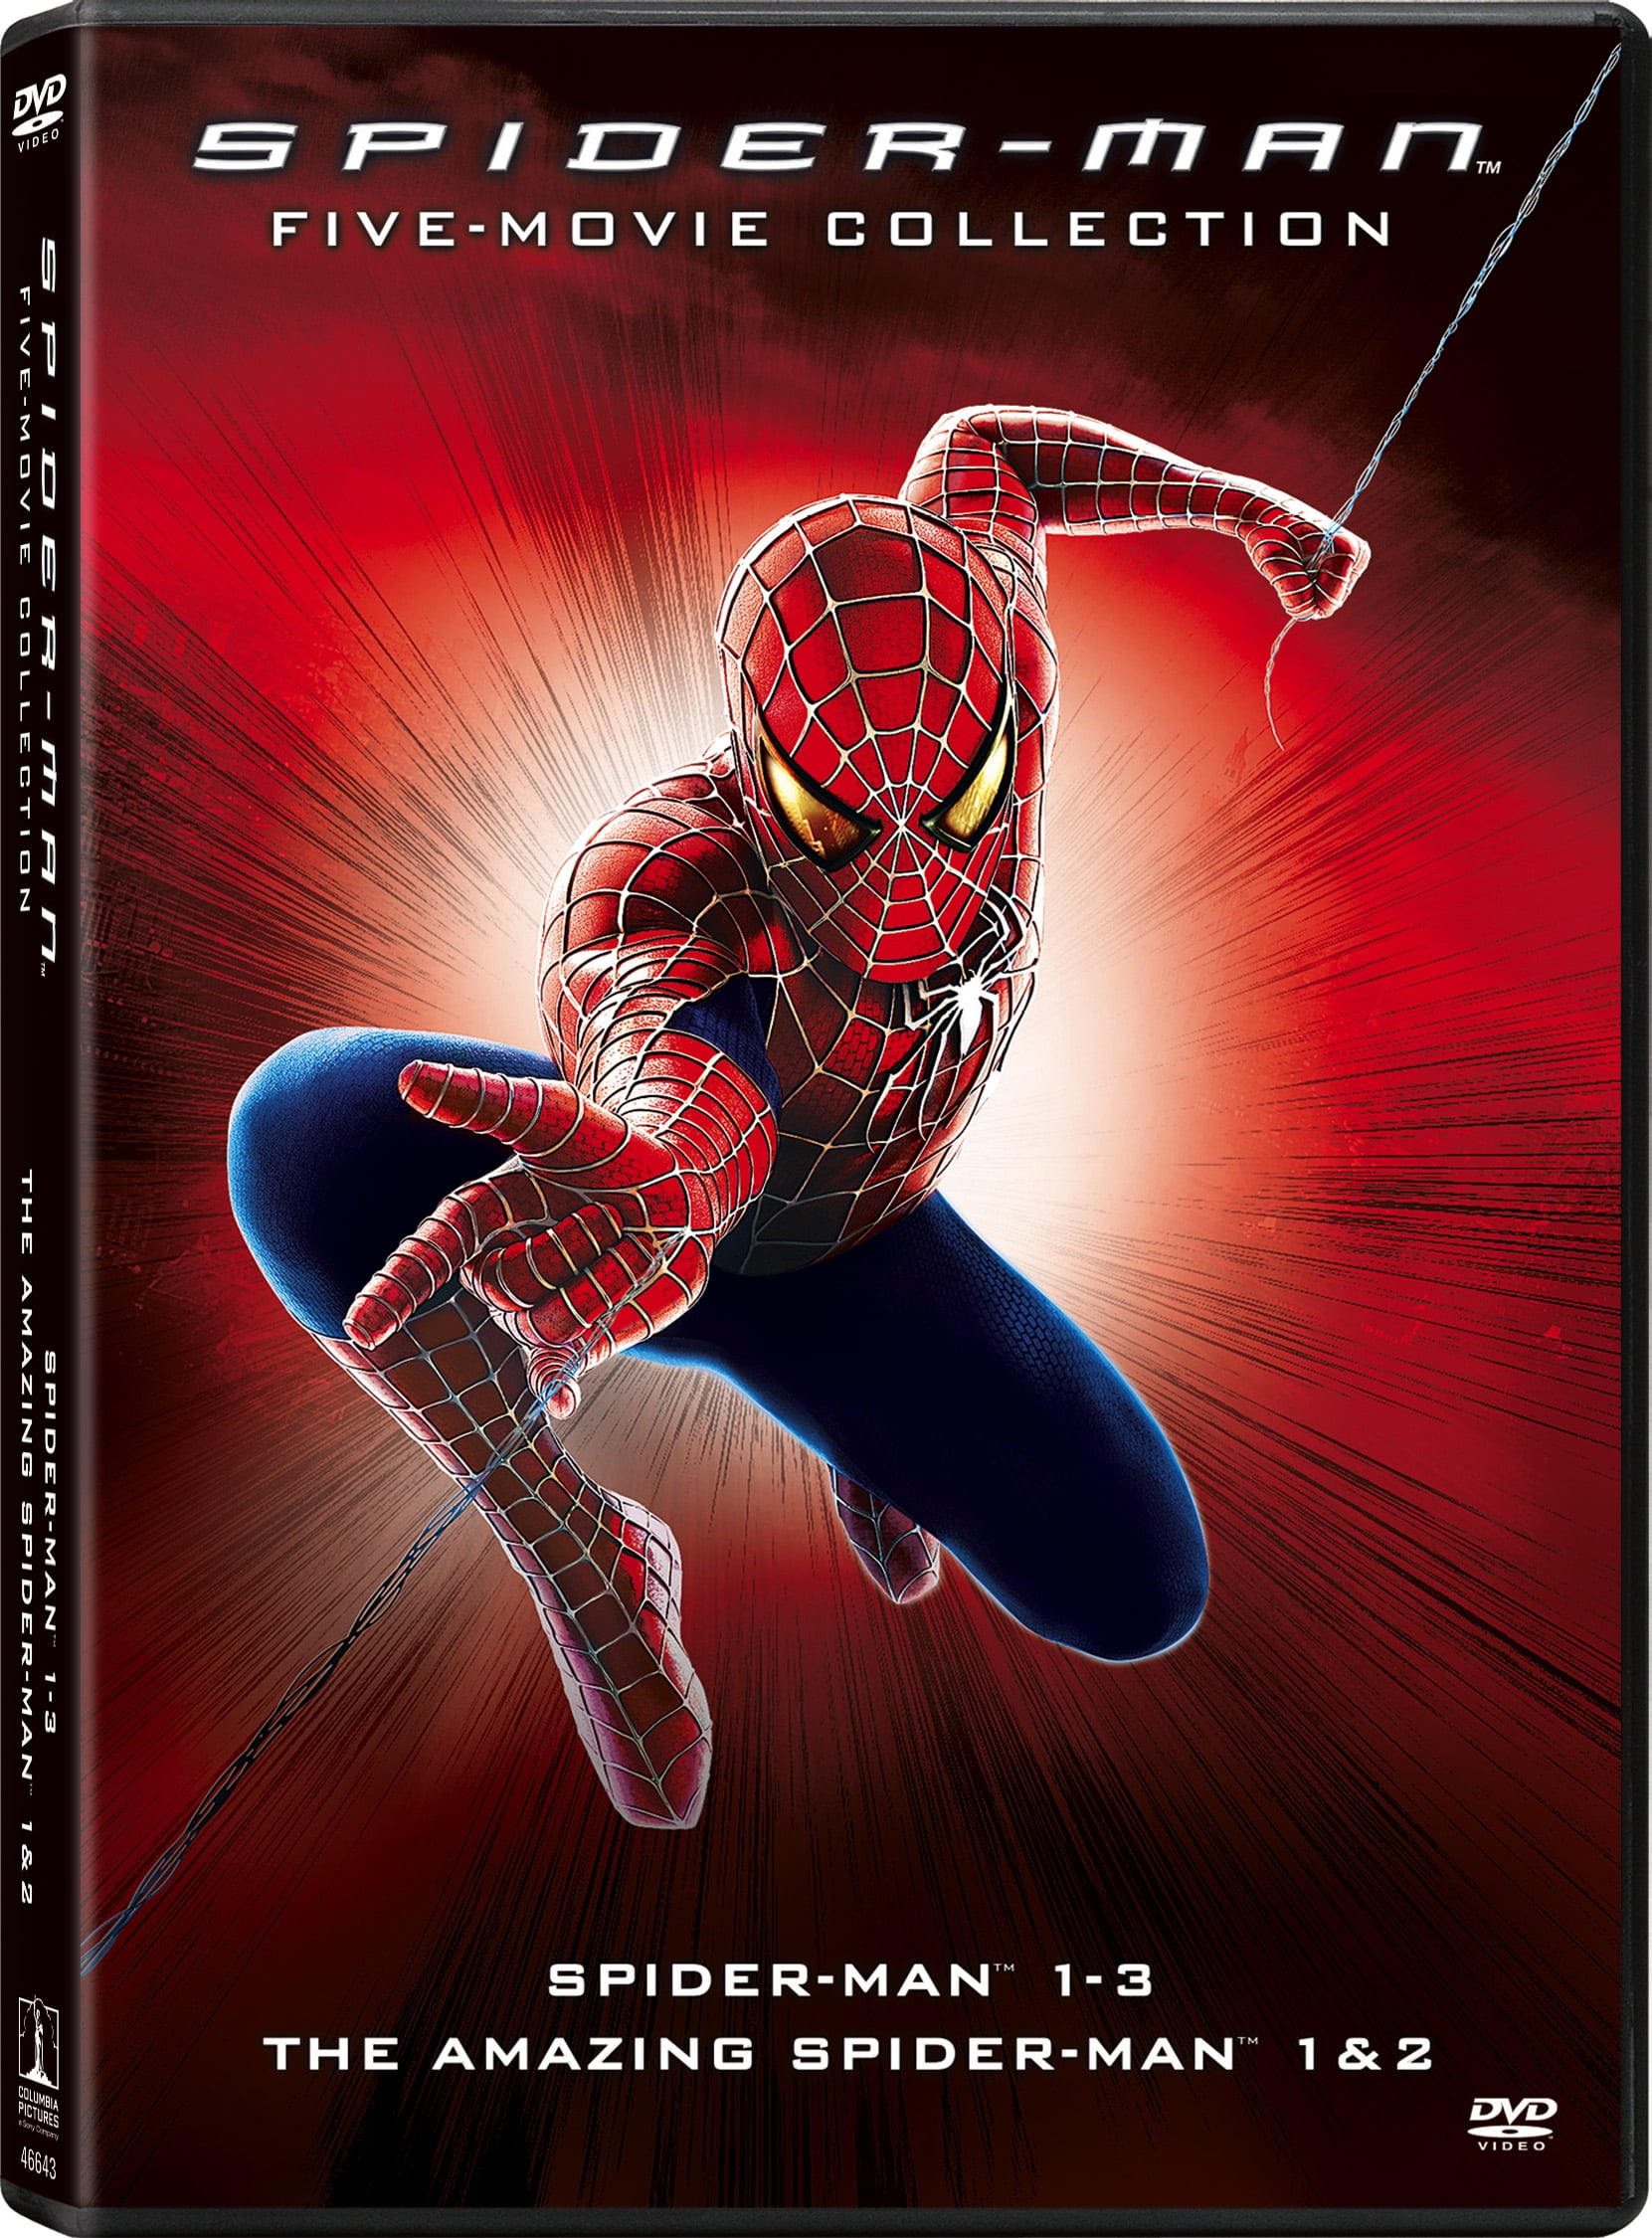 Spider-Man 2 - Movie Reviews and Movie Ratings - TV Guide